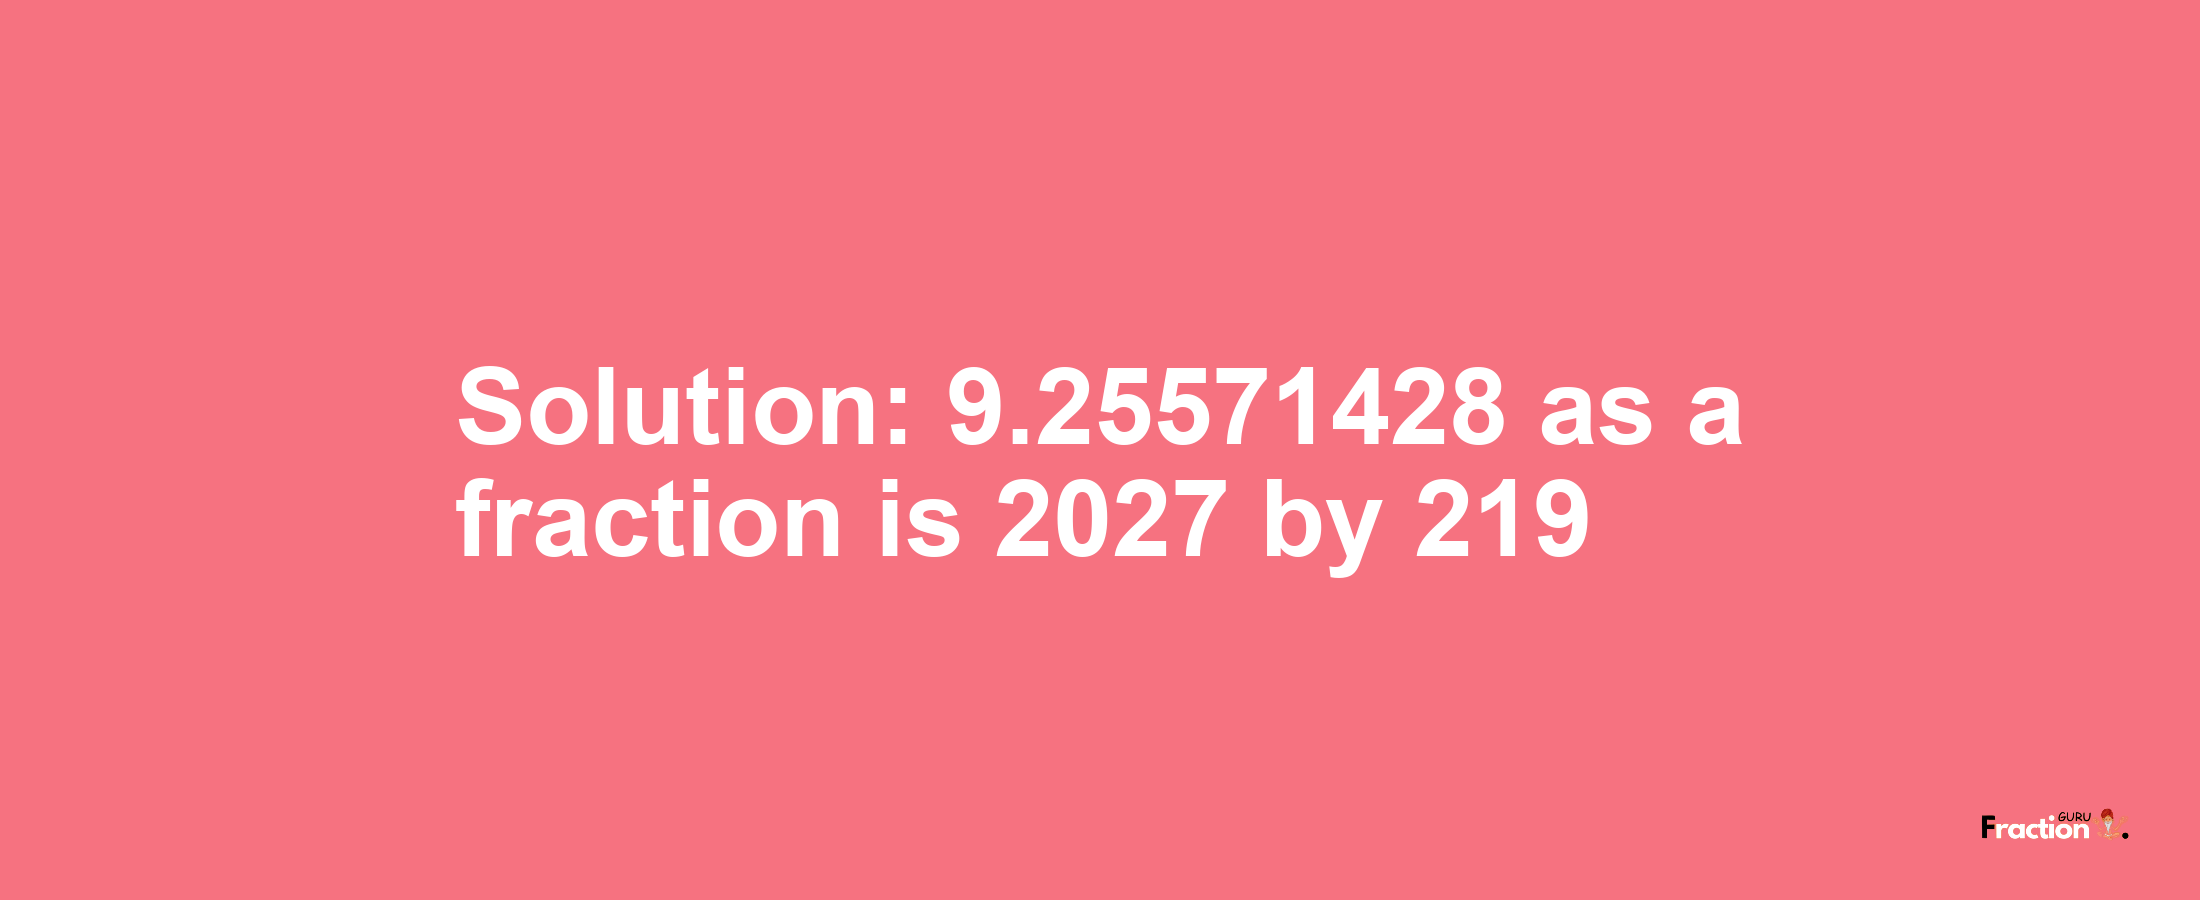 Solution:9.25571428 as a fraction is 2027/219